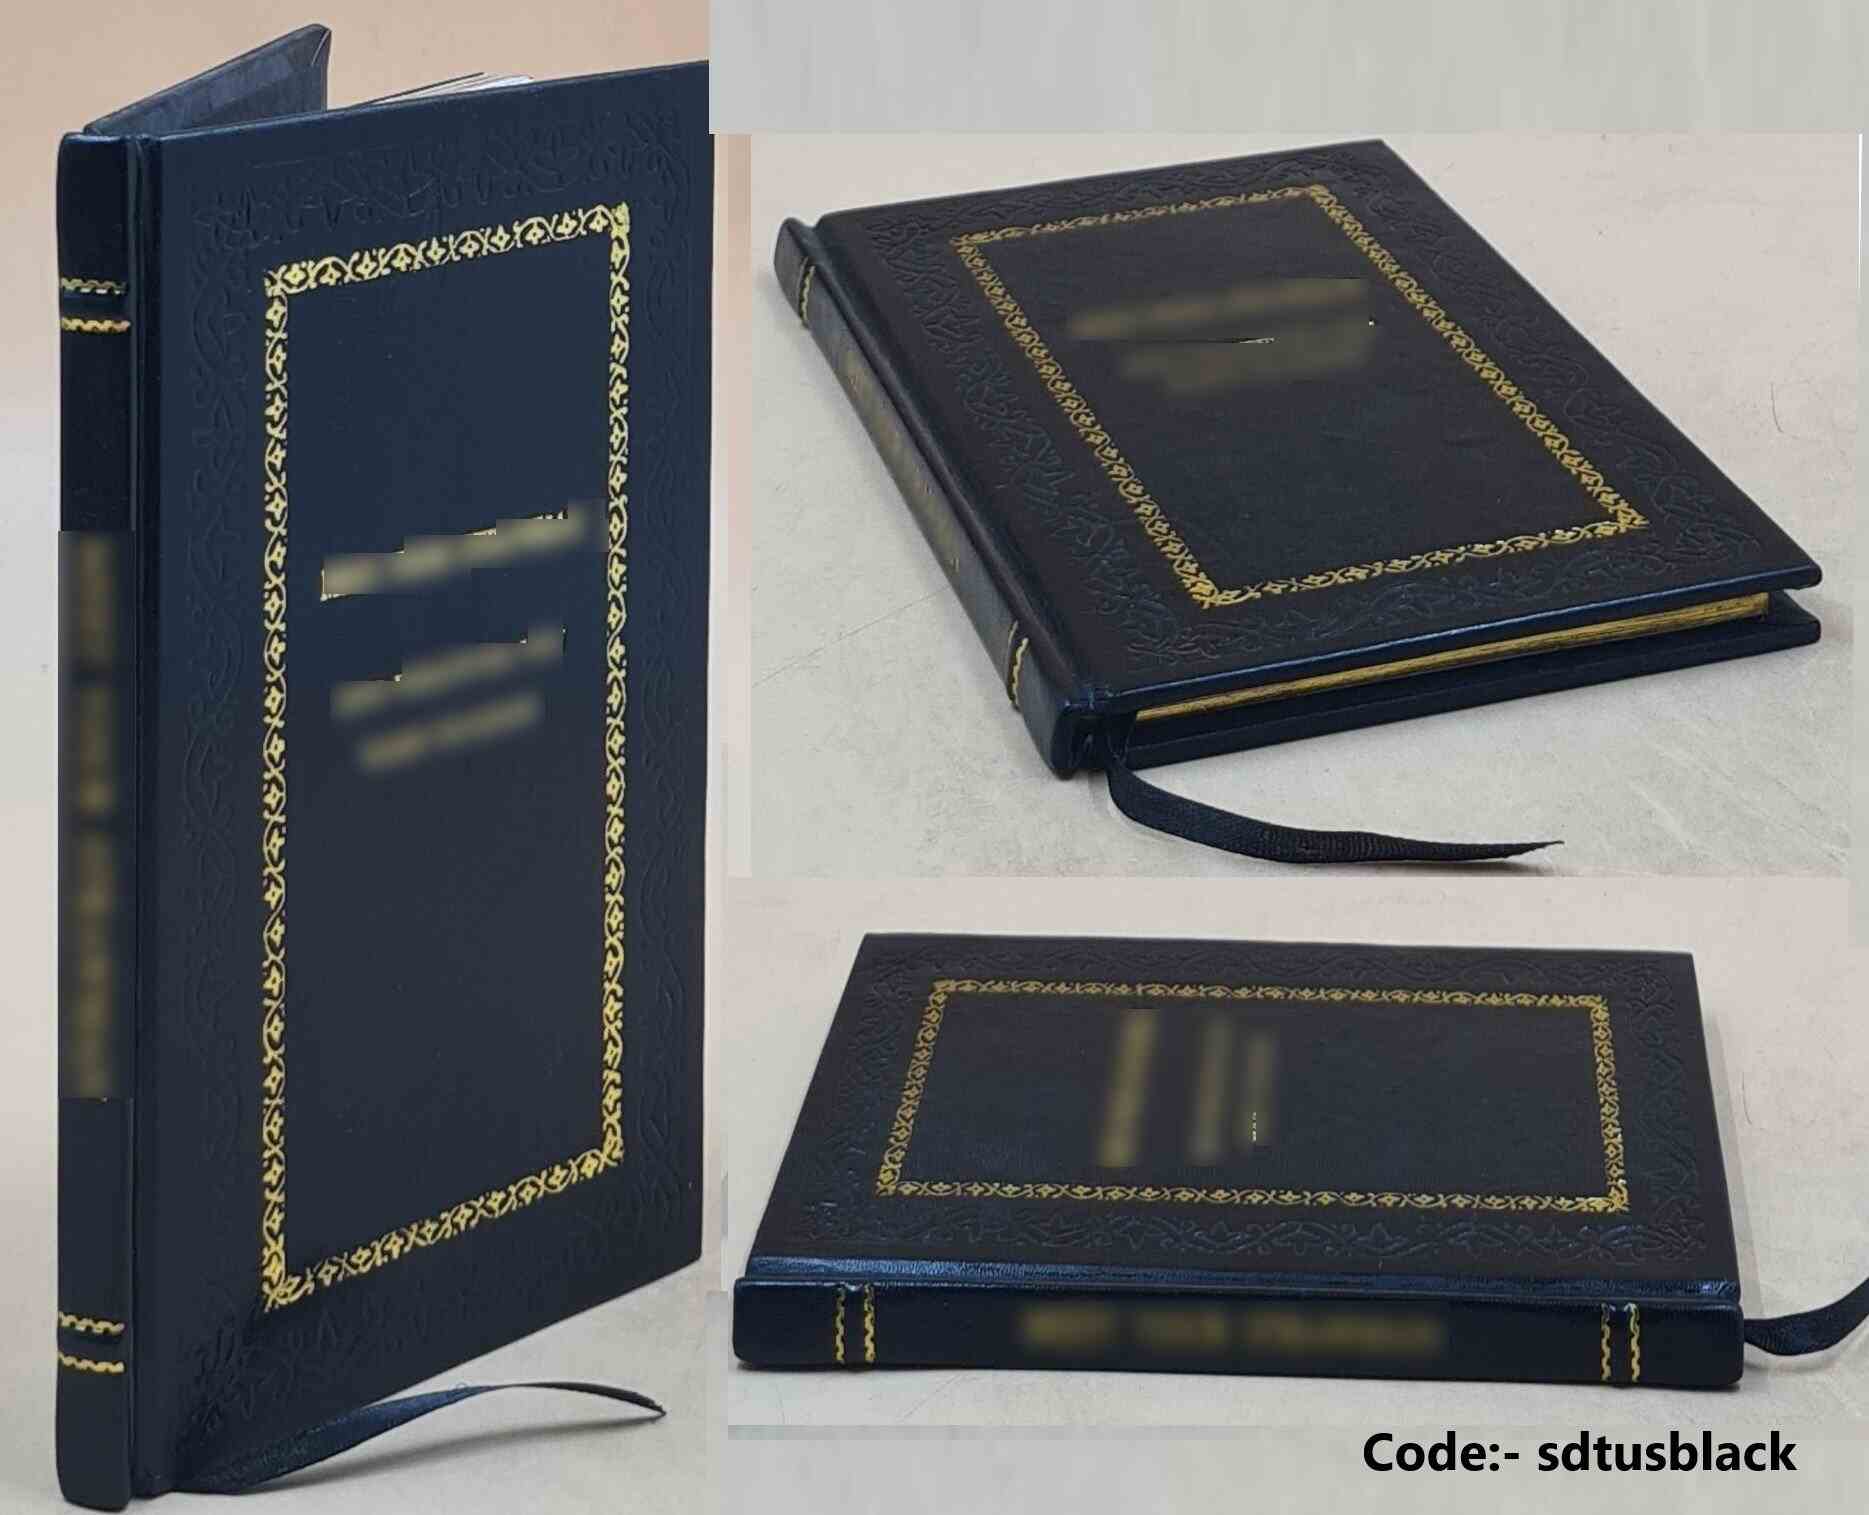 ROYAL　of　Hidden　the　by　Truth　Bound]　Leather　[Premium　New　(2016)　Christmas:　Behind　Surprising　The　Timothy.:　Keller,　Birth　Christ　COLLECTION